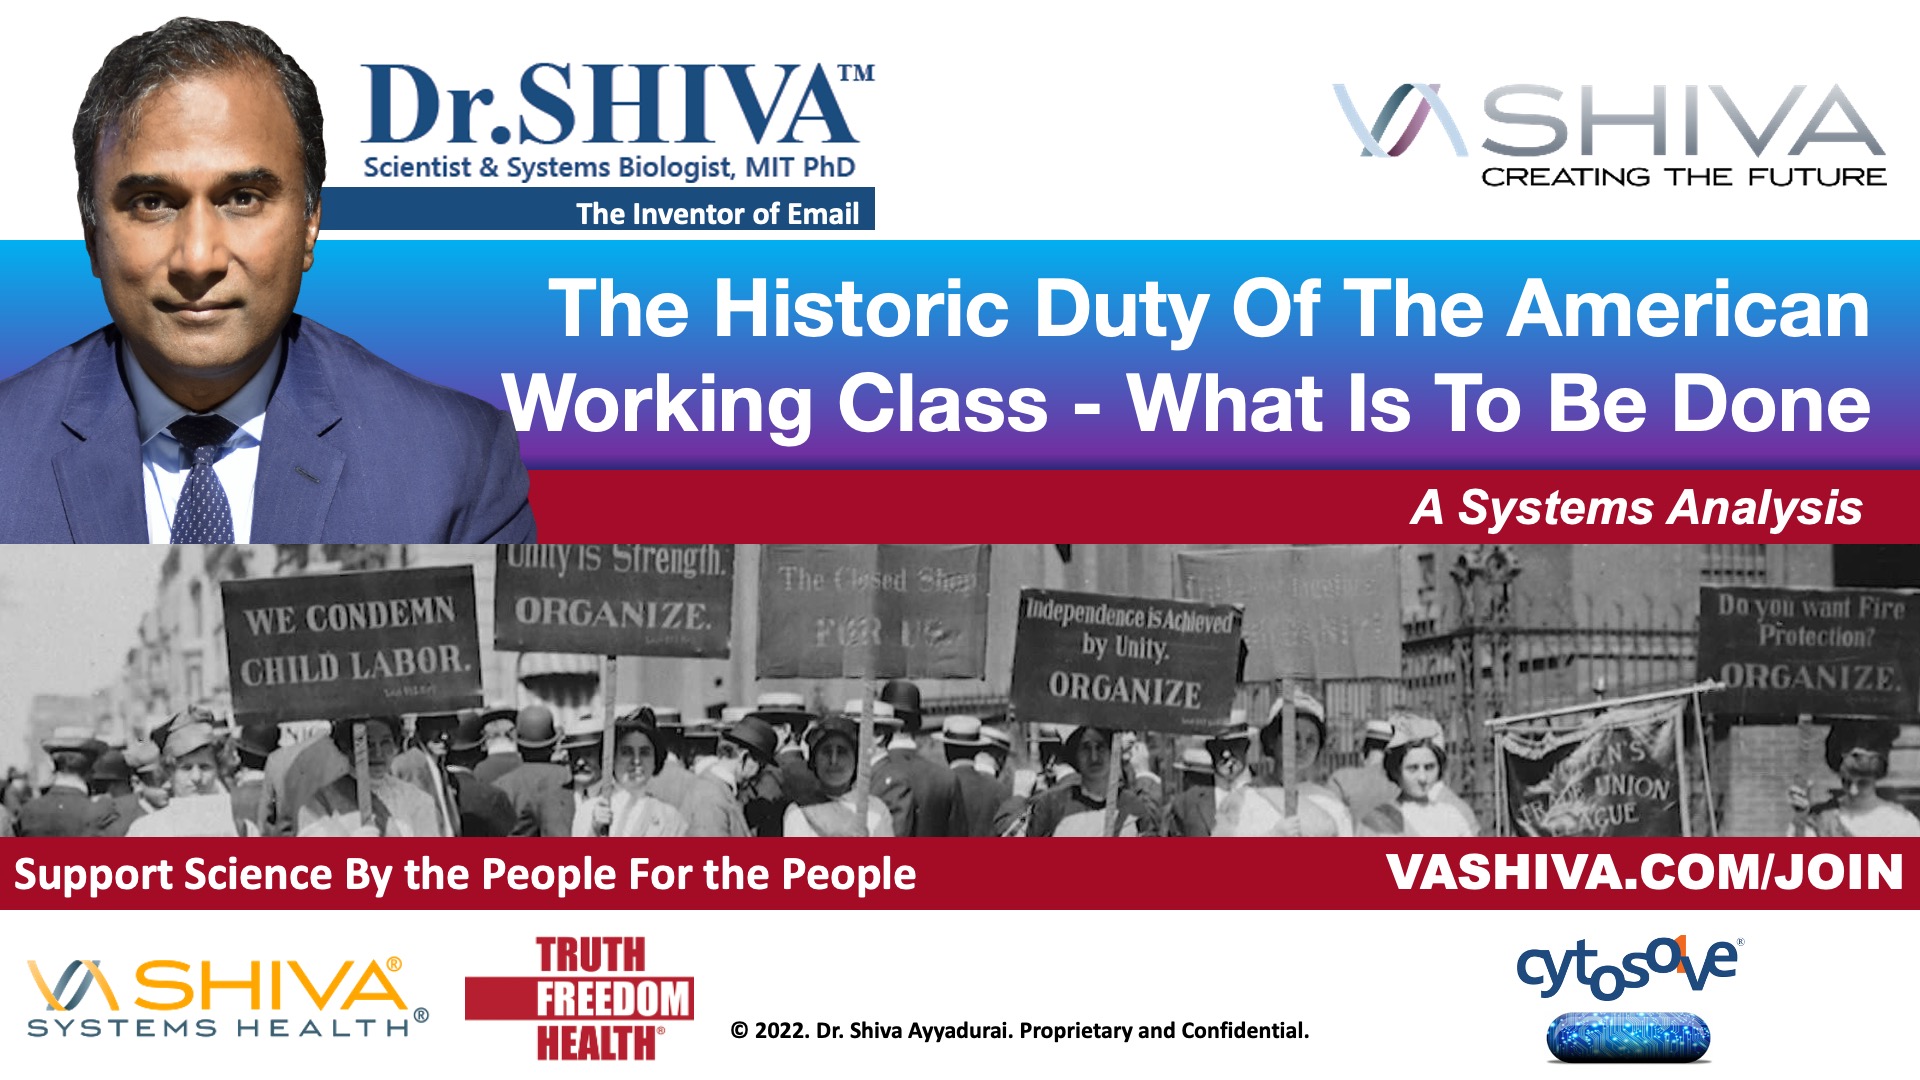 Dr.SHIVA LIVE: The Historic Duty Of The American Working Class - What Is To Be Done